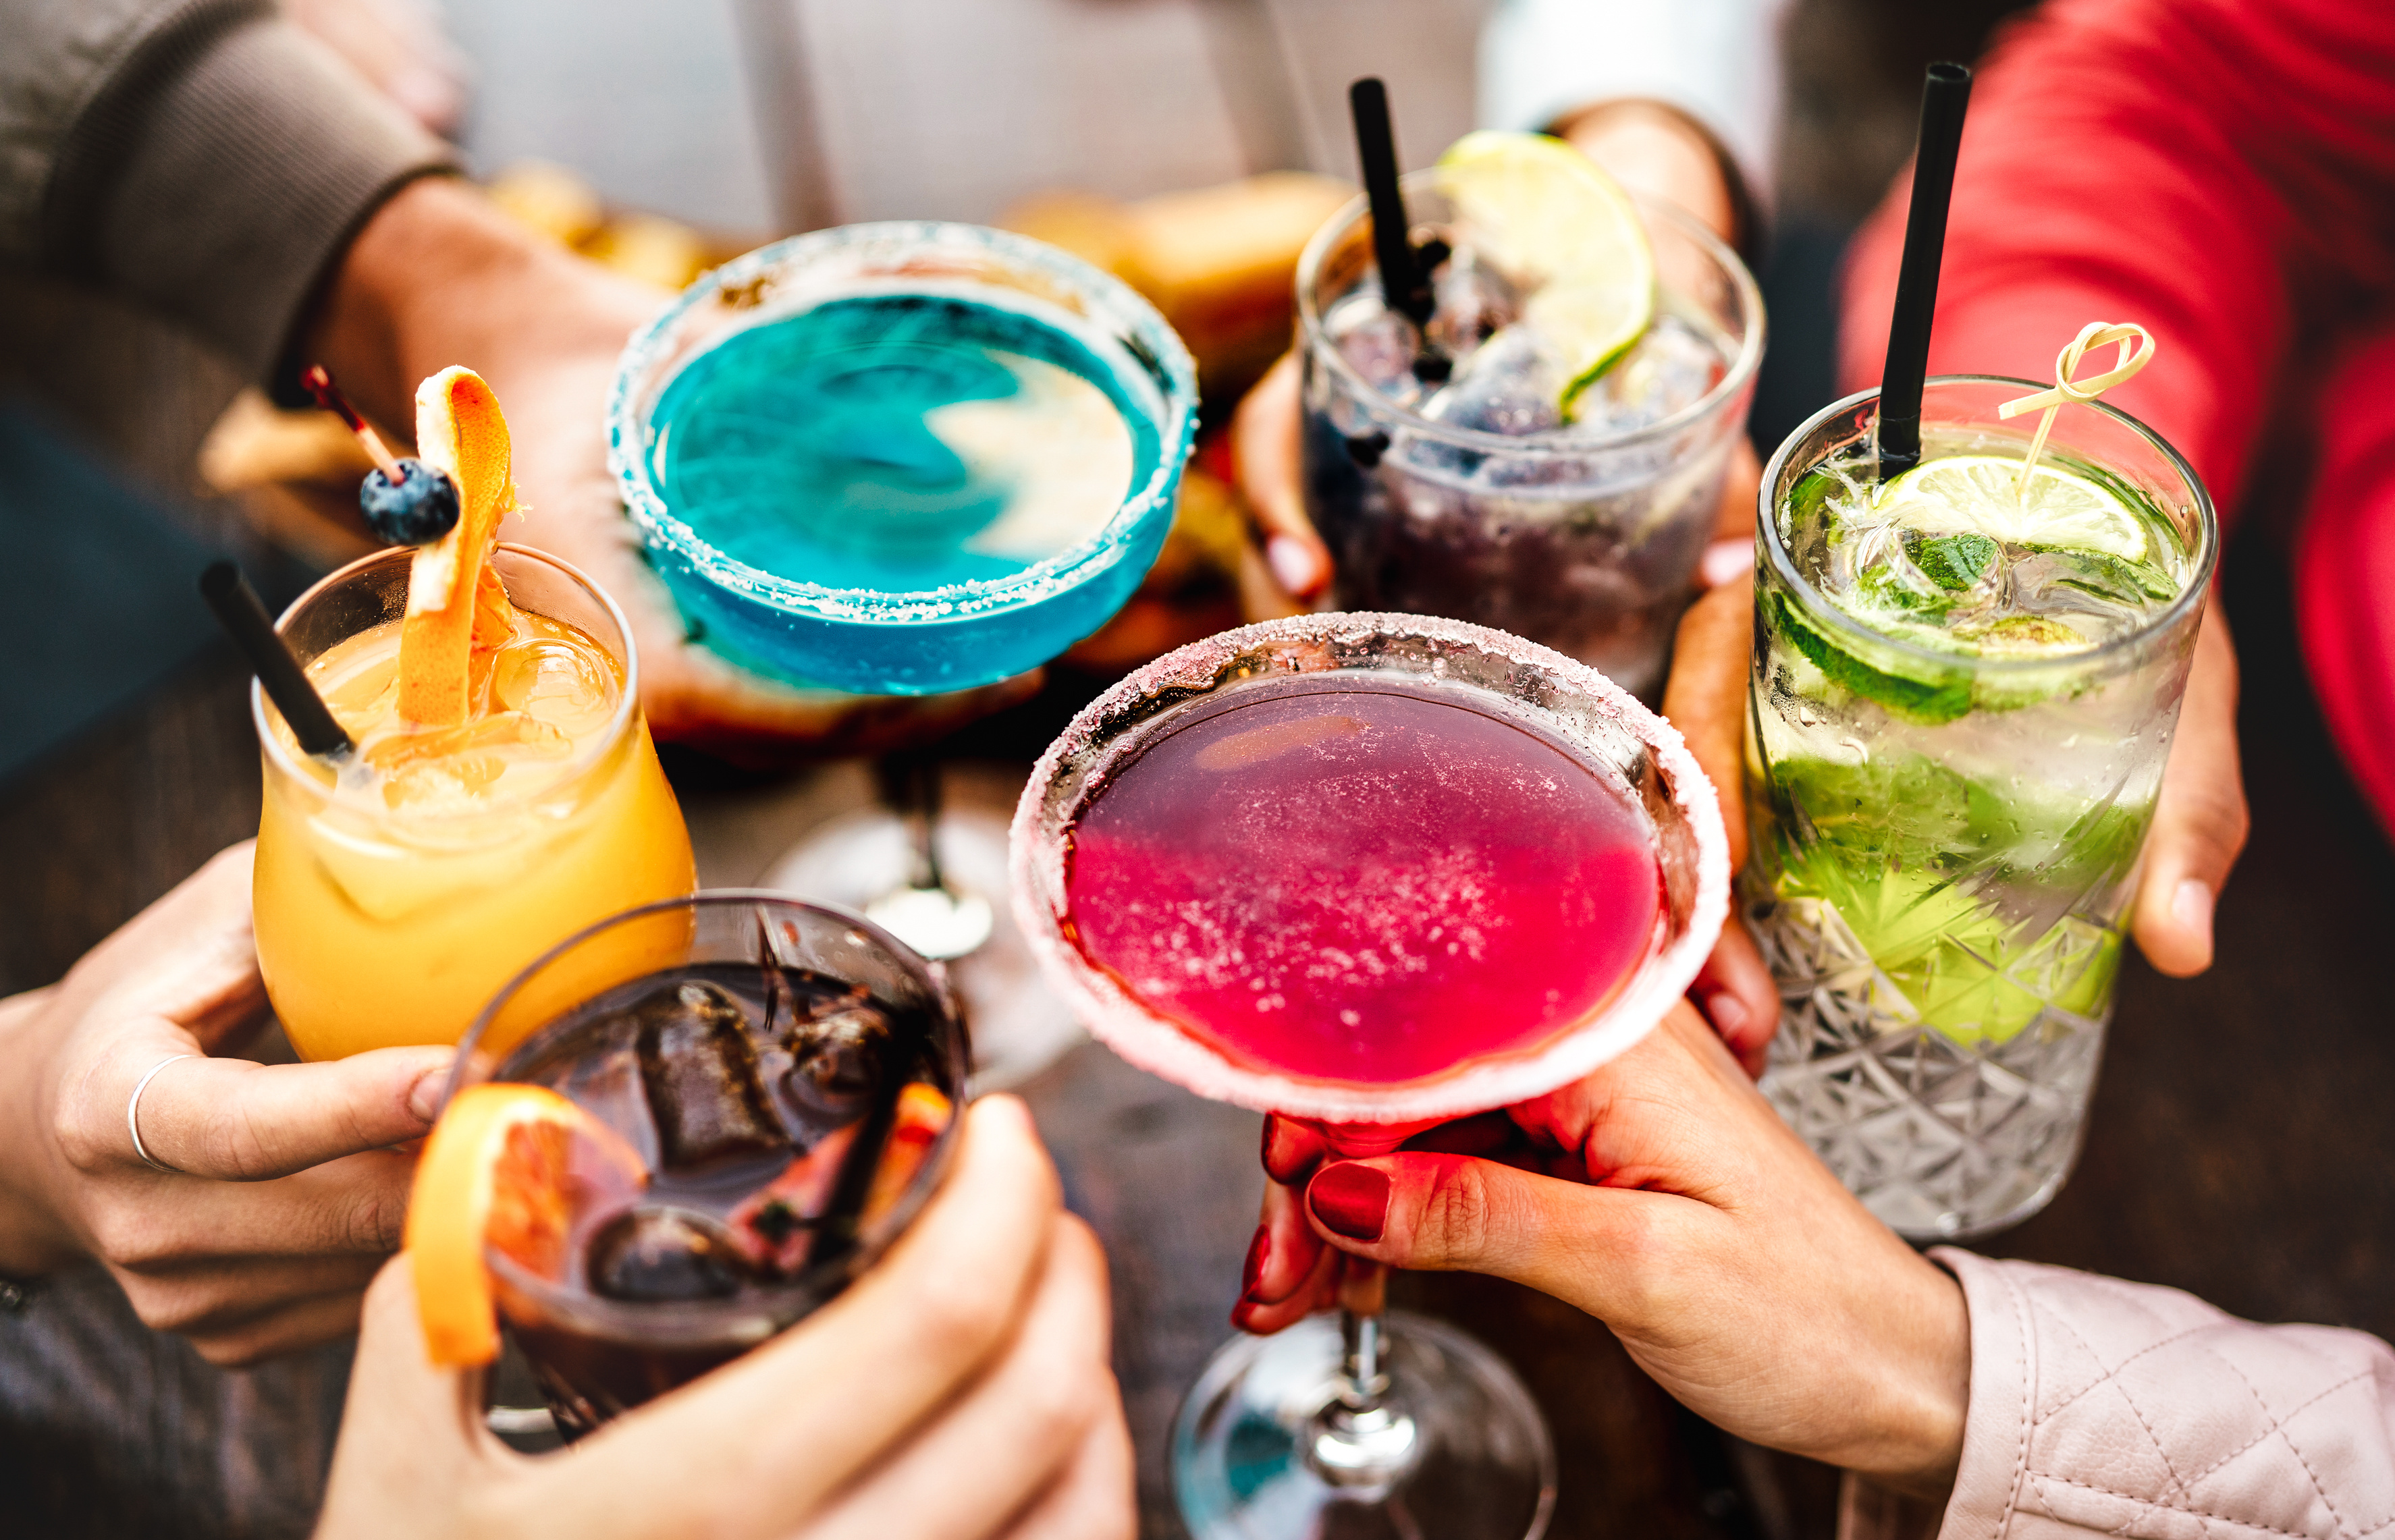 Tapping into the latest North American food and beverage trends